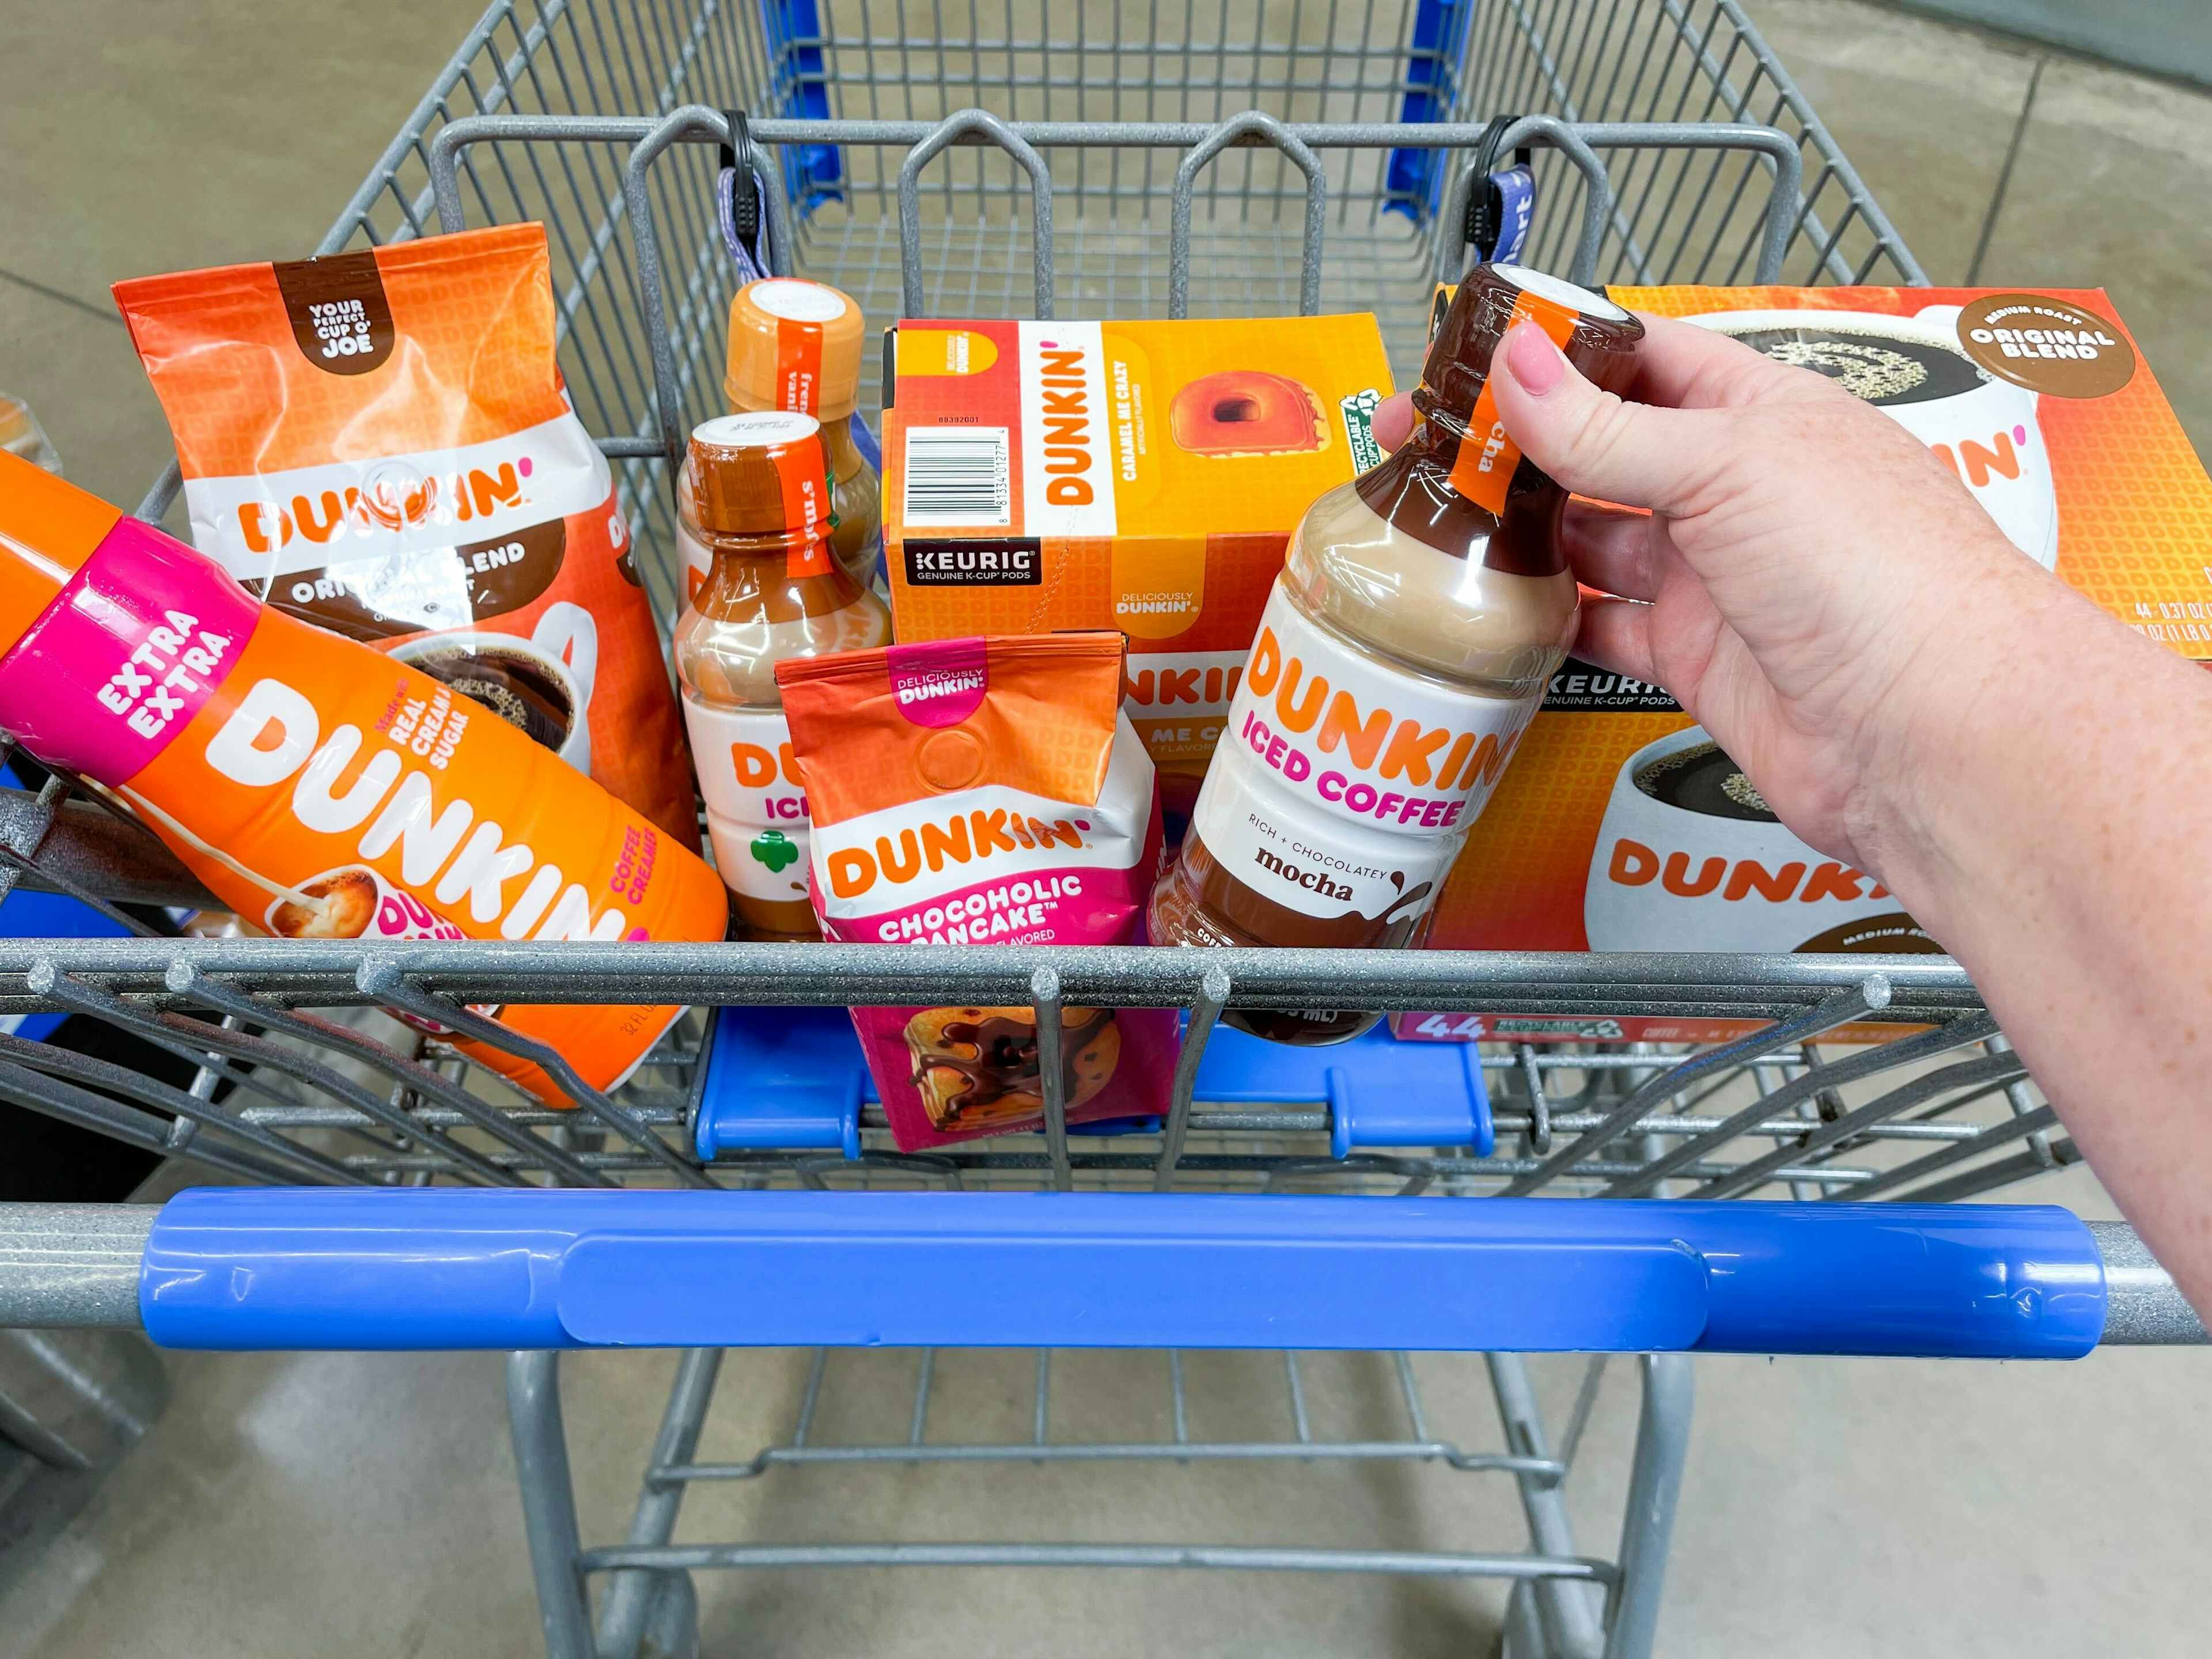 A Walmart shopping cart basket full of the different Dunkin brand items that are available at Walmart.